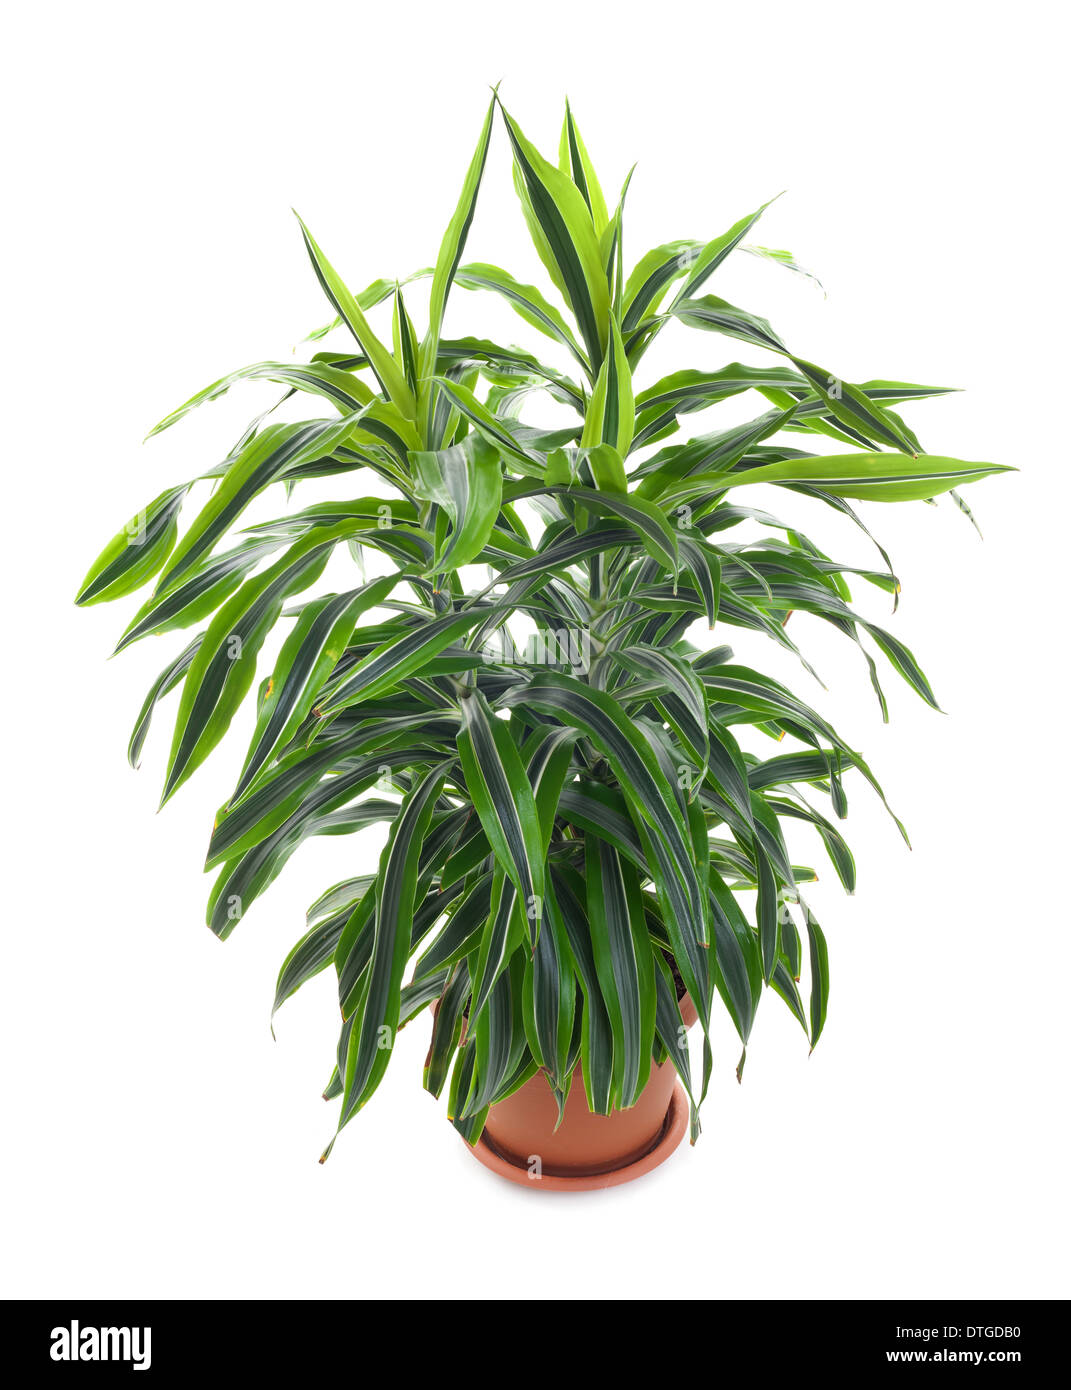 Chlorophytum - evergreen perennial flowering plants in the family Asparagaceae. Stock Photo